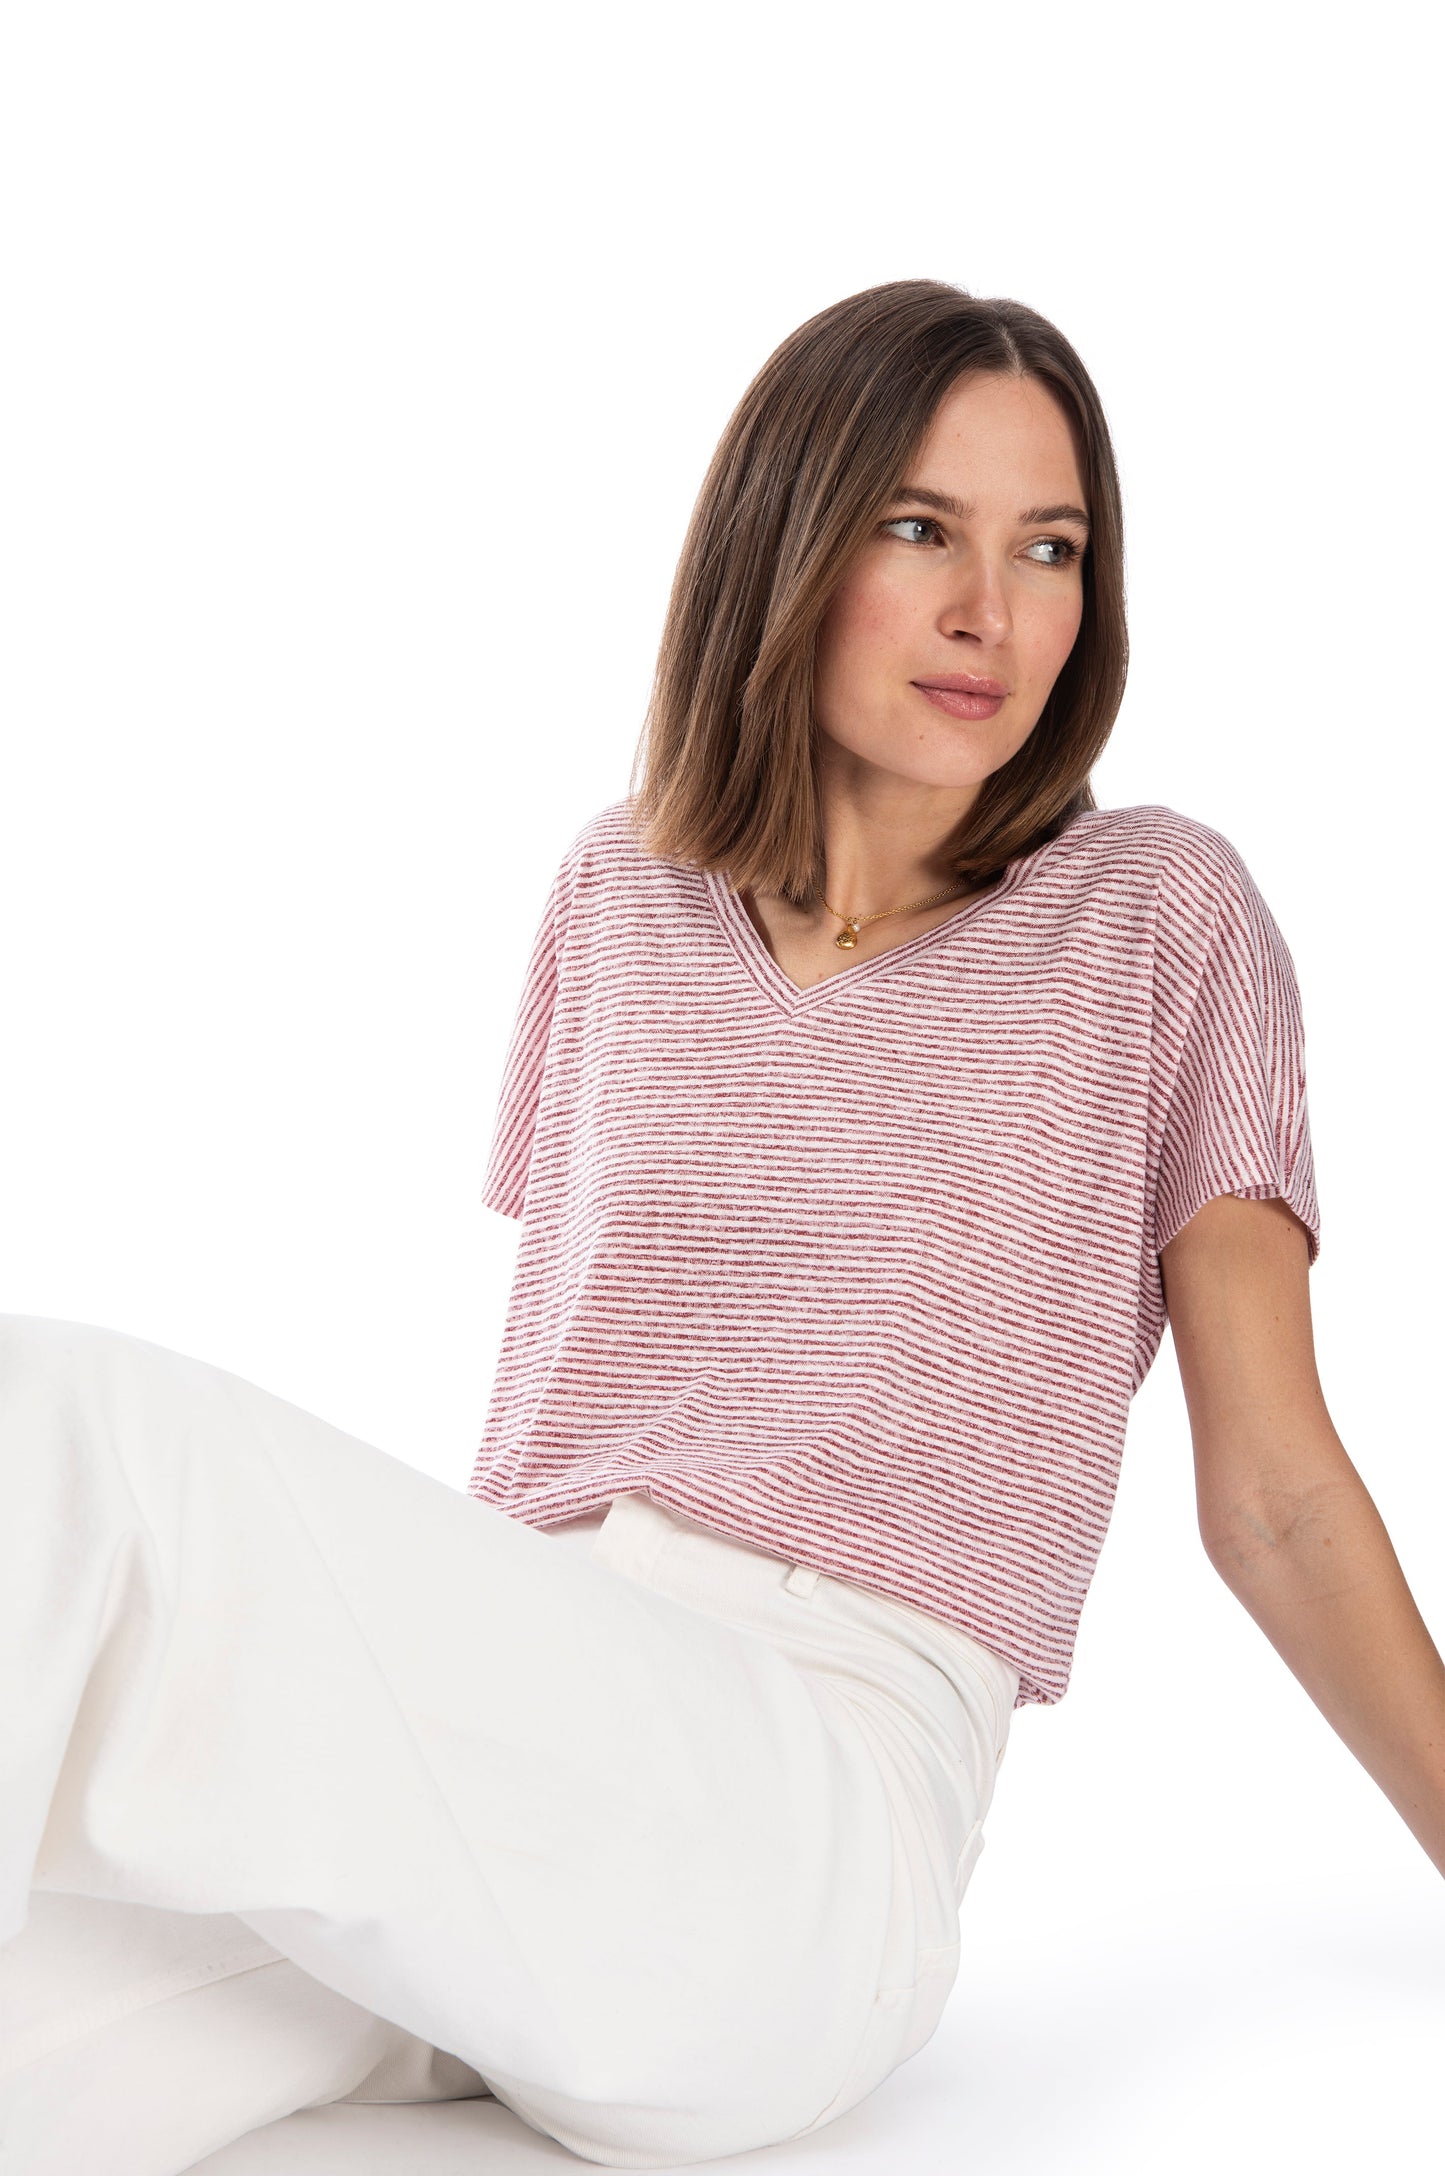 Woman in a B Collection by Bobeau Caty Relaxed Tee, V-neck tee, and white pants posing with a contemplative gaze against a white background.